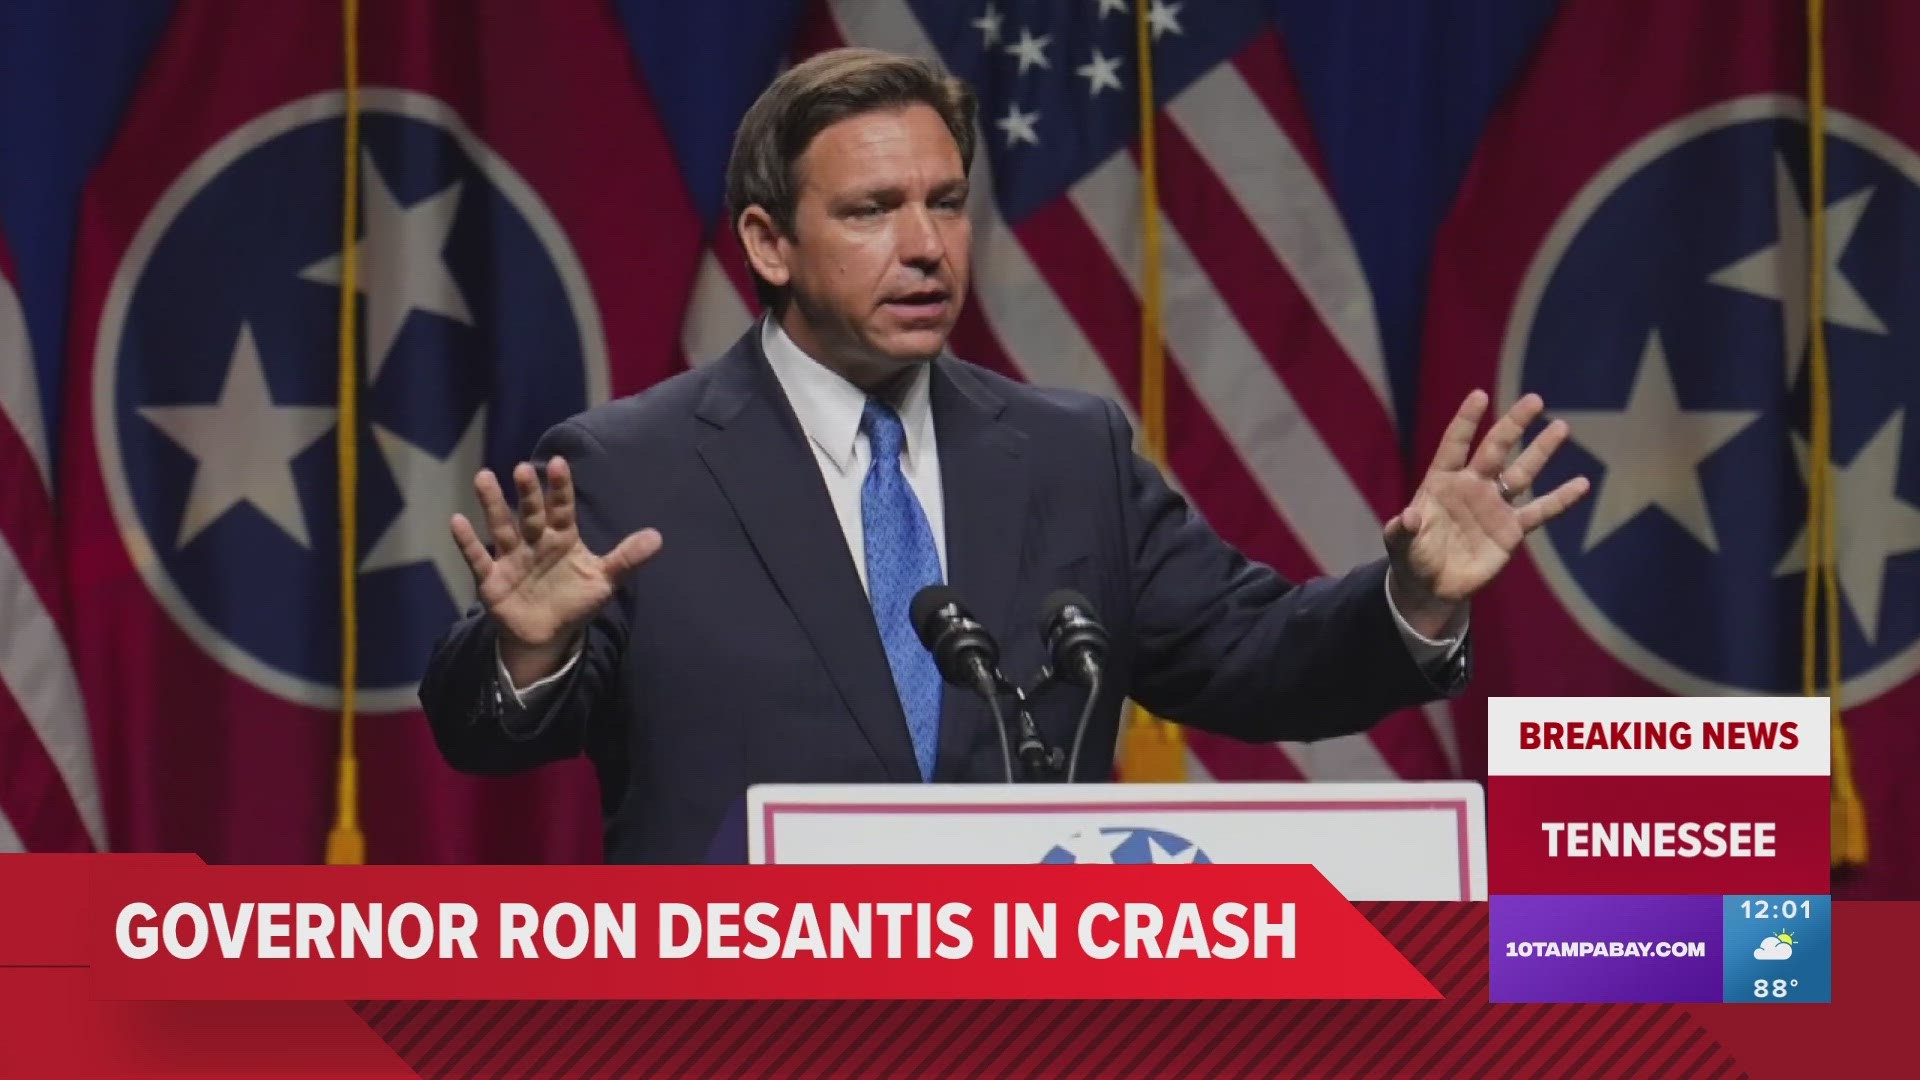 Florida Gov. Ron DeSantis was in a car crash Tuesday morning while en route to a campaign event in Tennessee, his spokesperson said in a statement.